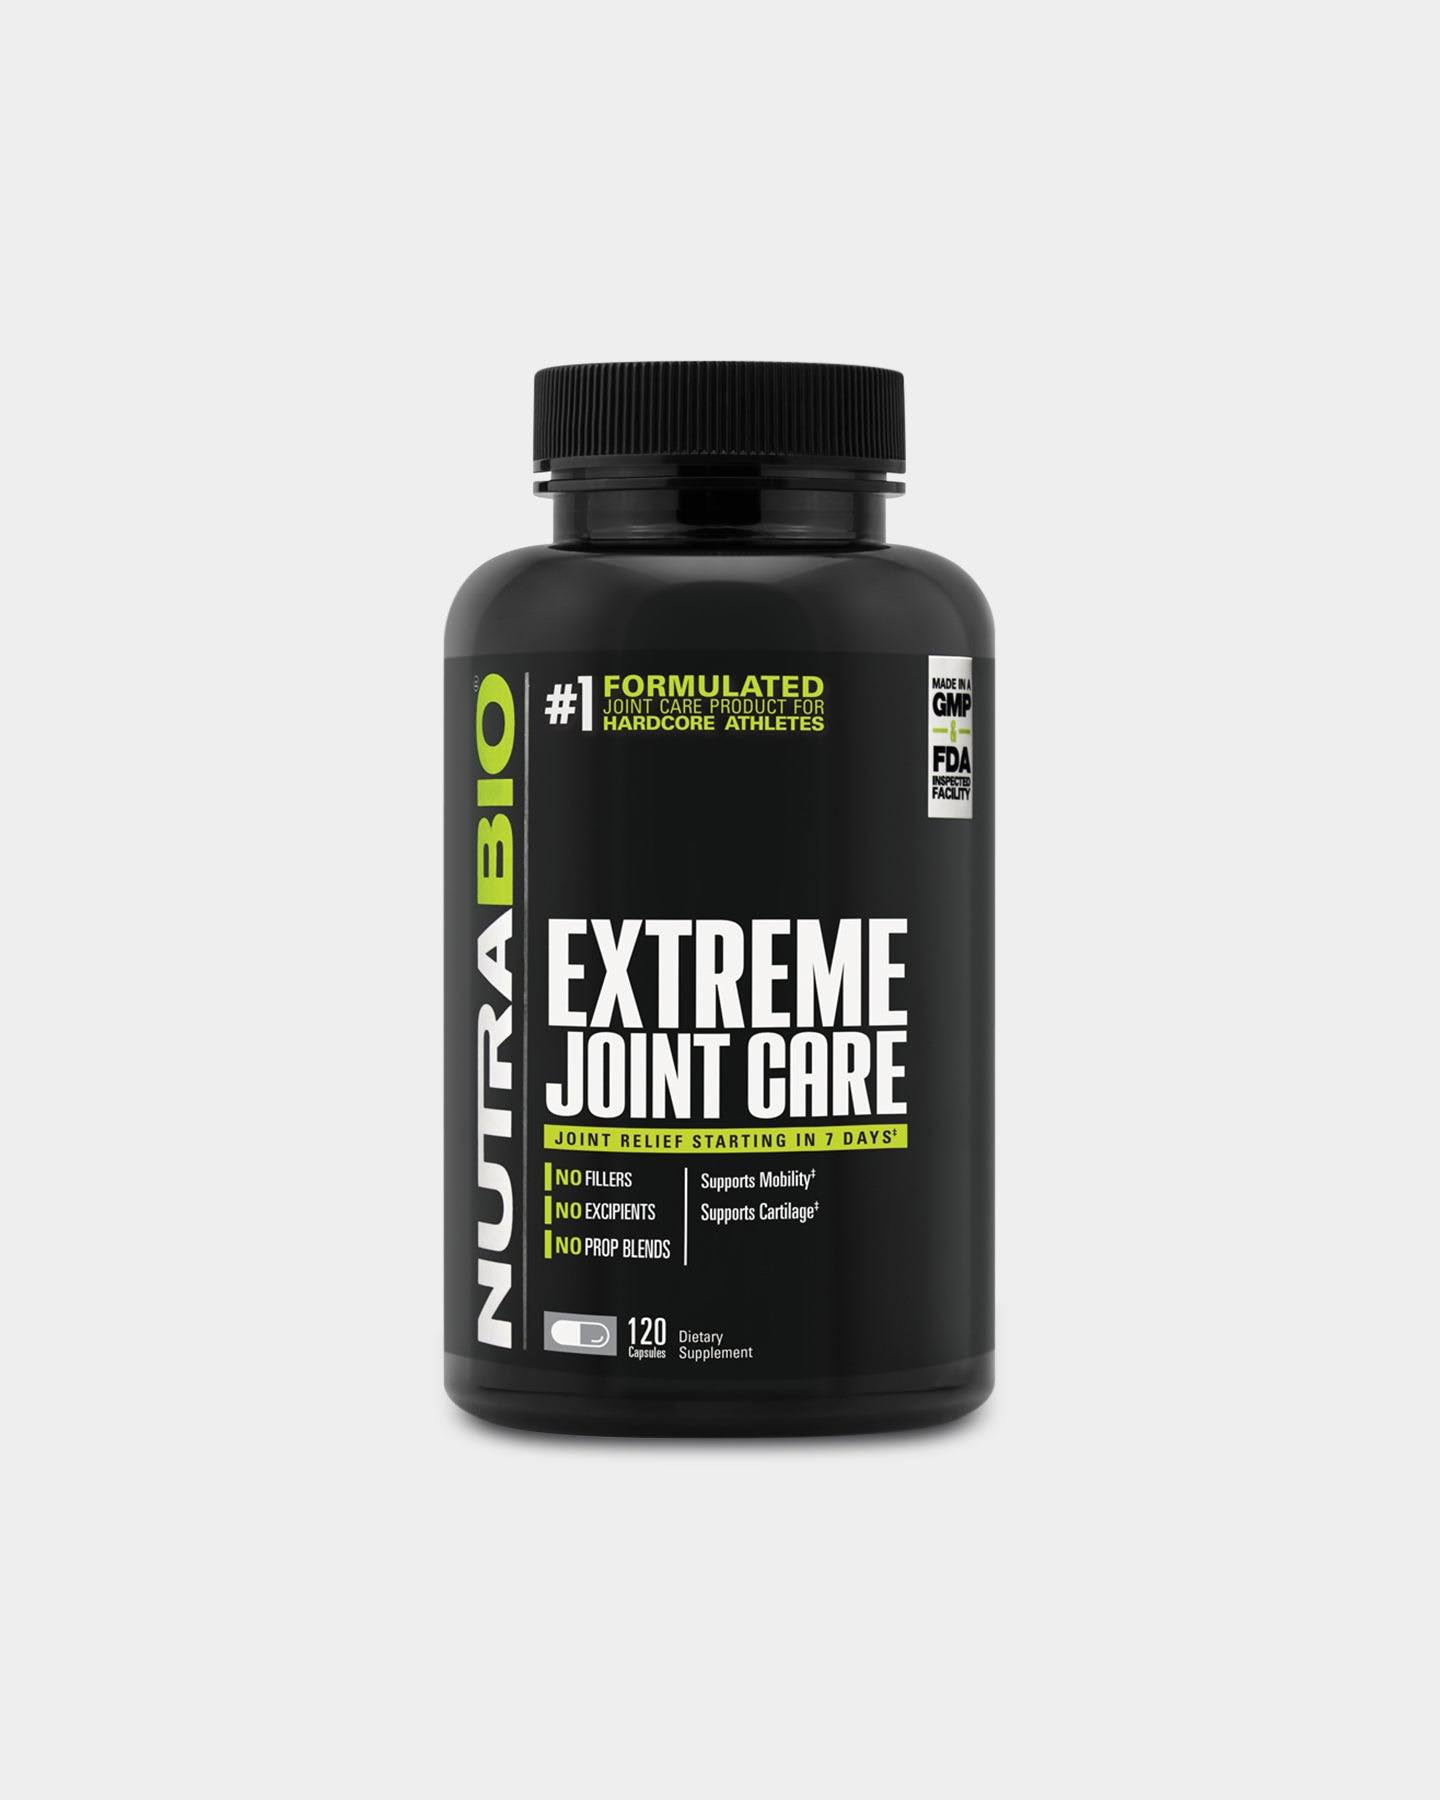 Nutrabio Extreme Joint Care Supplement - 120 Capsules